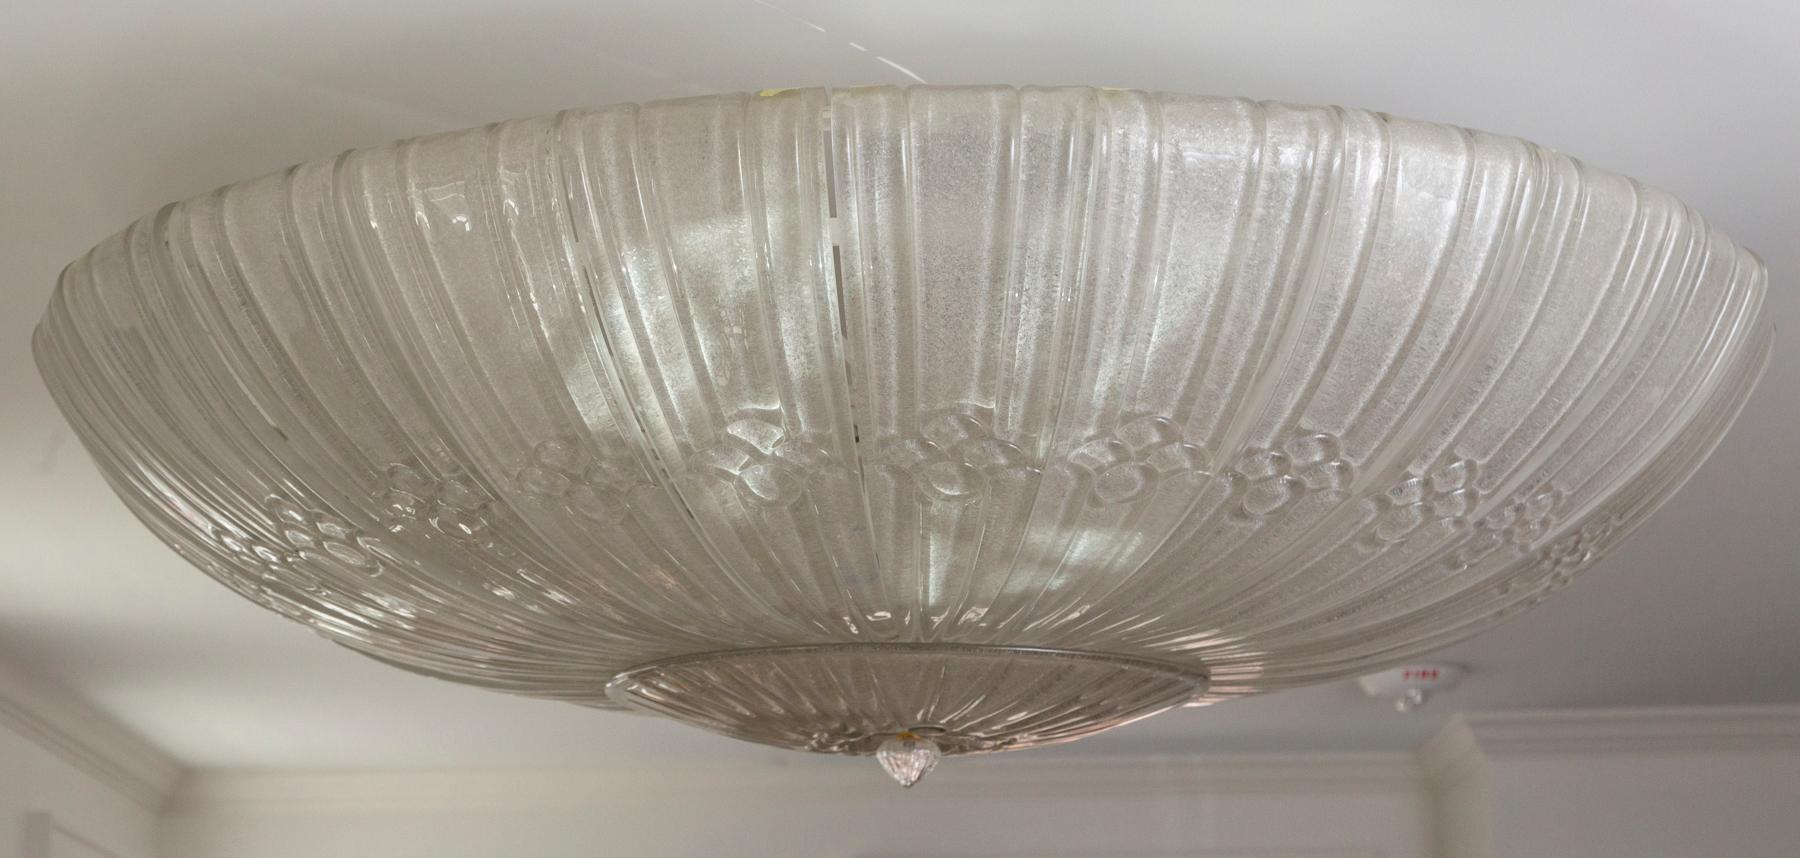 Rare opportunity to offer a very thickly blown icy warm off-white Murano ceiling fixture by Barovier & Toso, blown originally in one piece and then cut into 27 sleeves. Note 26 sleeves are shown installed. The 27th sleeve may be added to close all